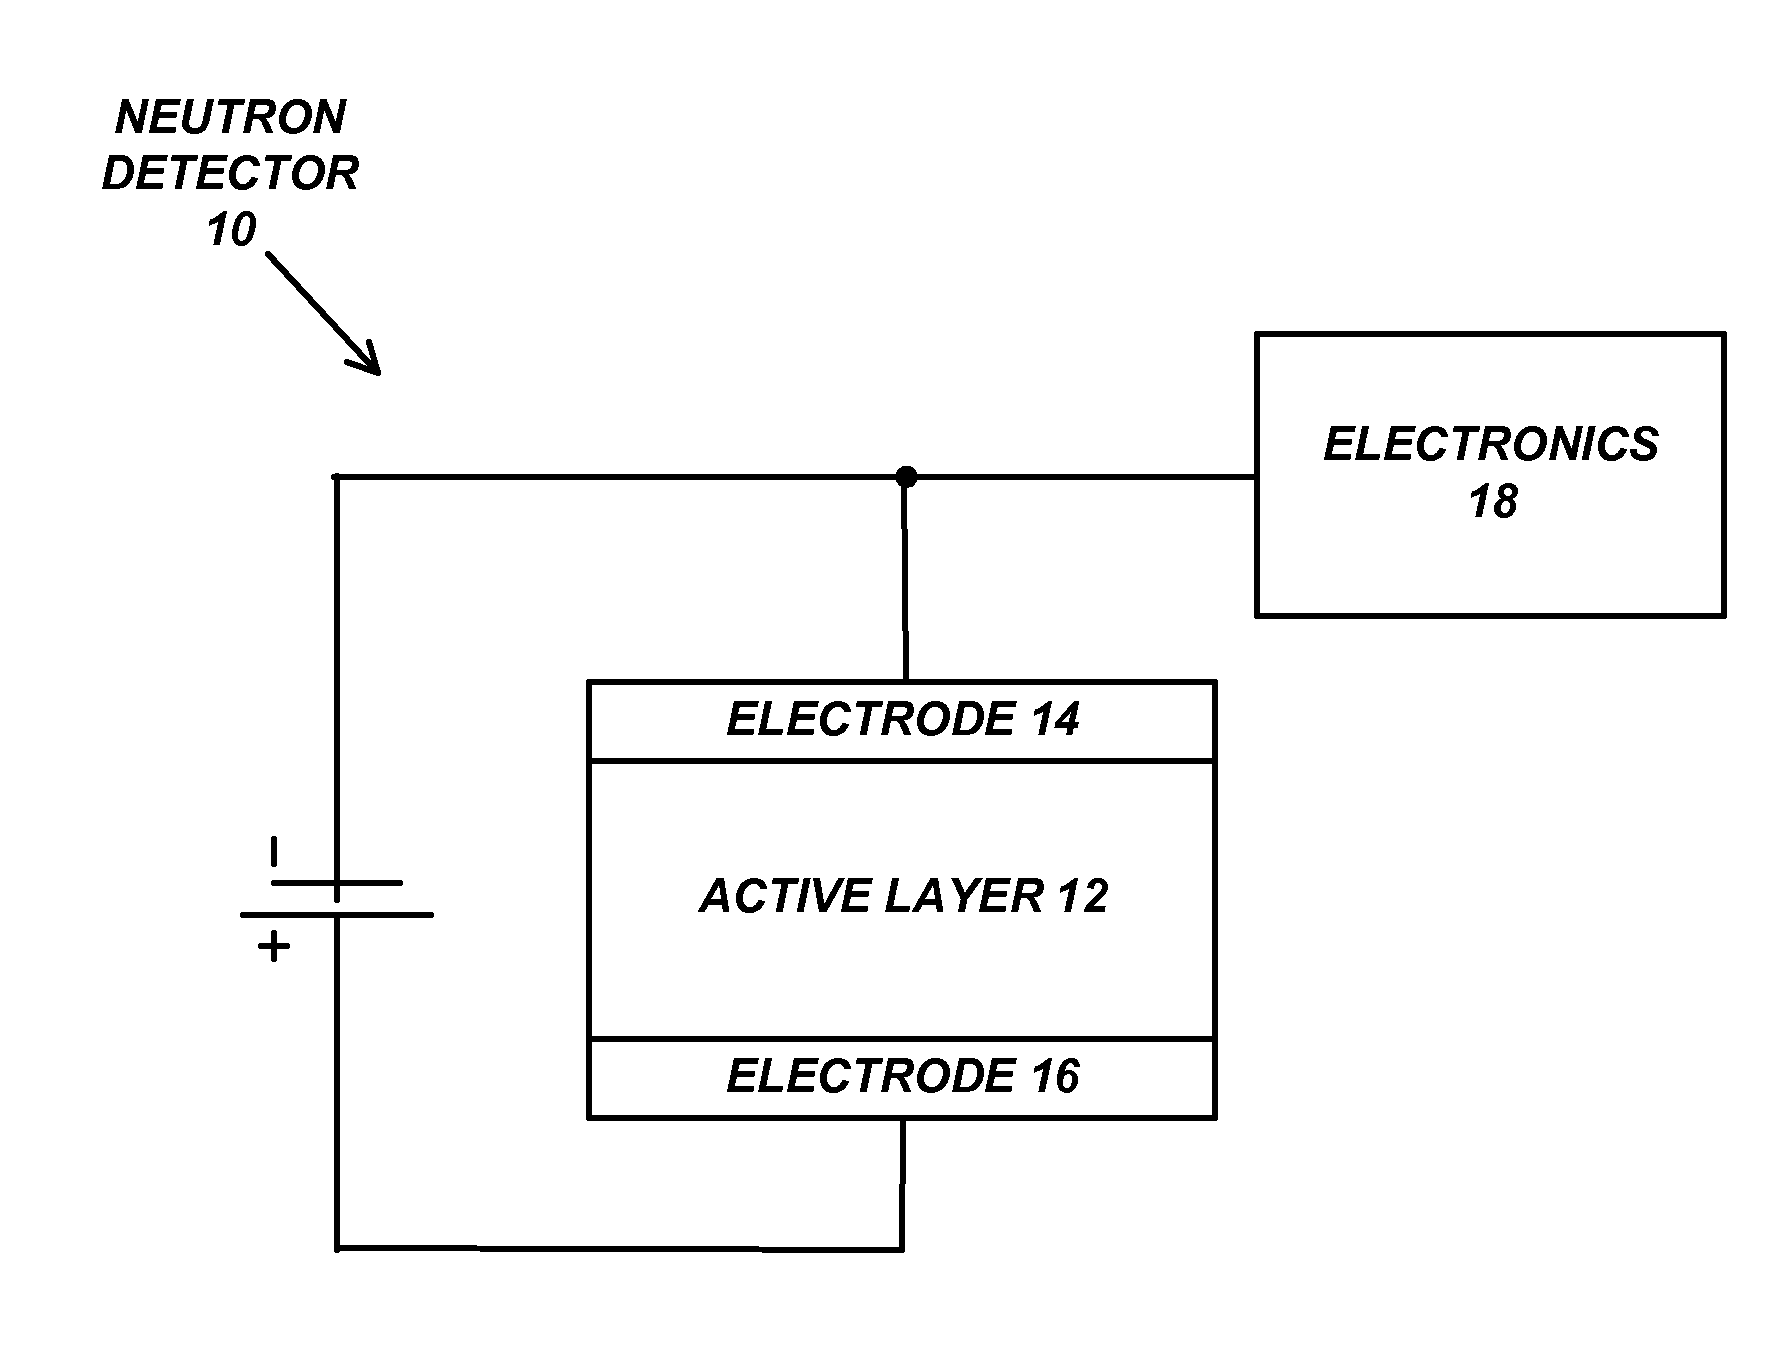 Neutron detectors based on organic and inorganic polymers, small molecules and particles, and their method of fabrication